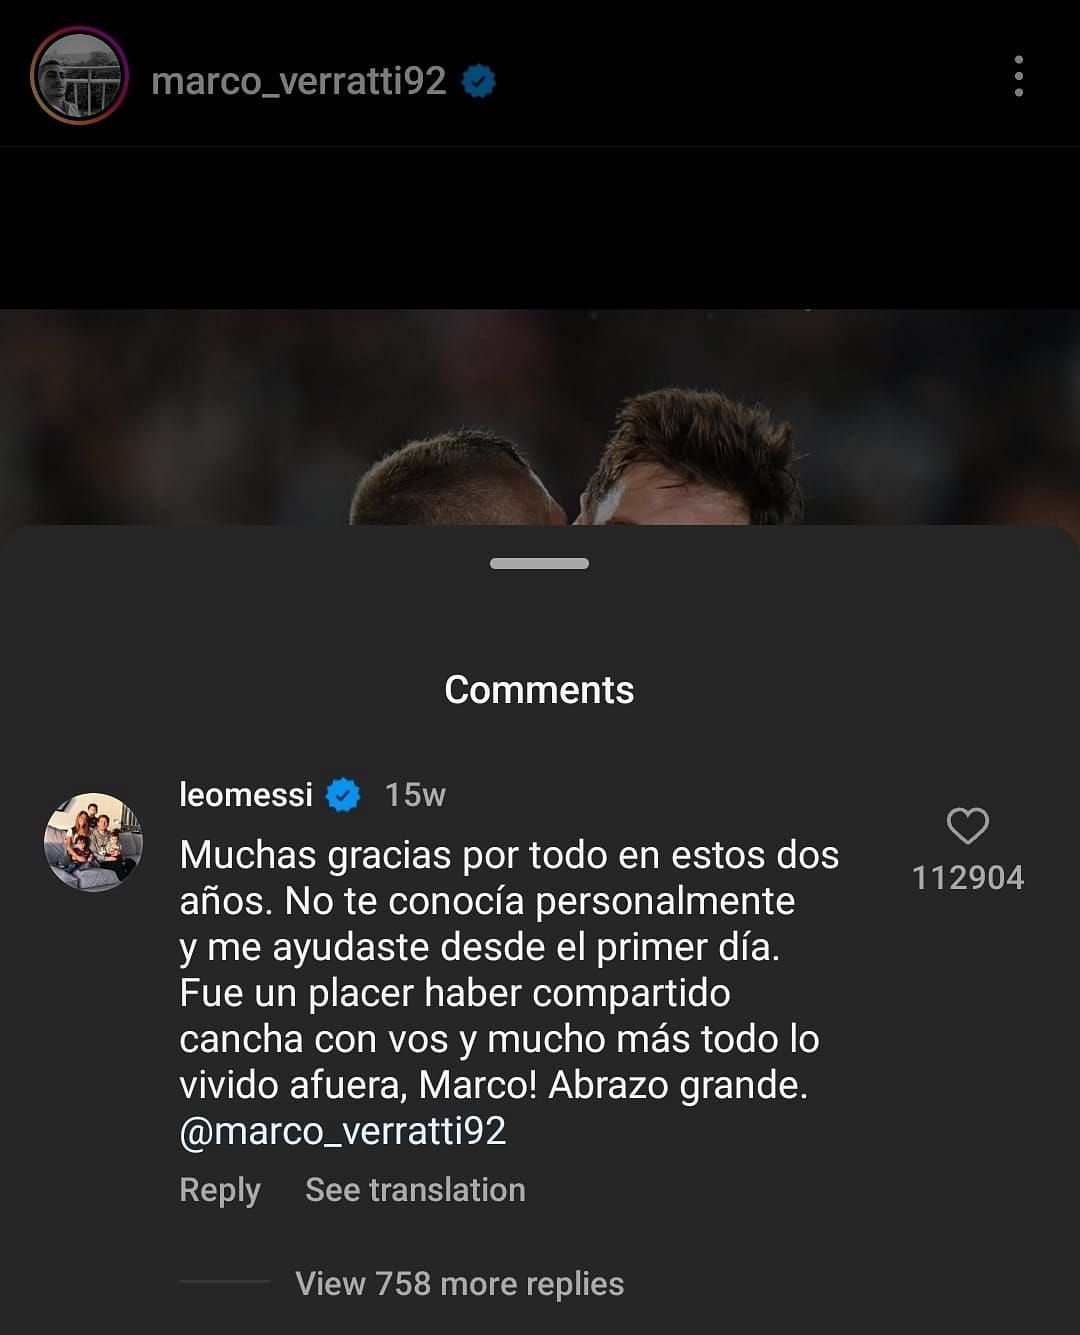 Lionel Messi&#039;s comment on Marco Verratti&#039;s Instagram post from June 4.